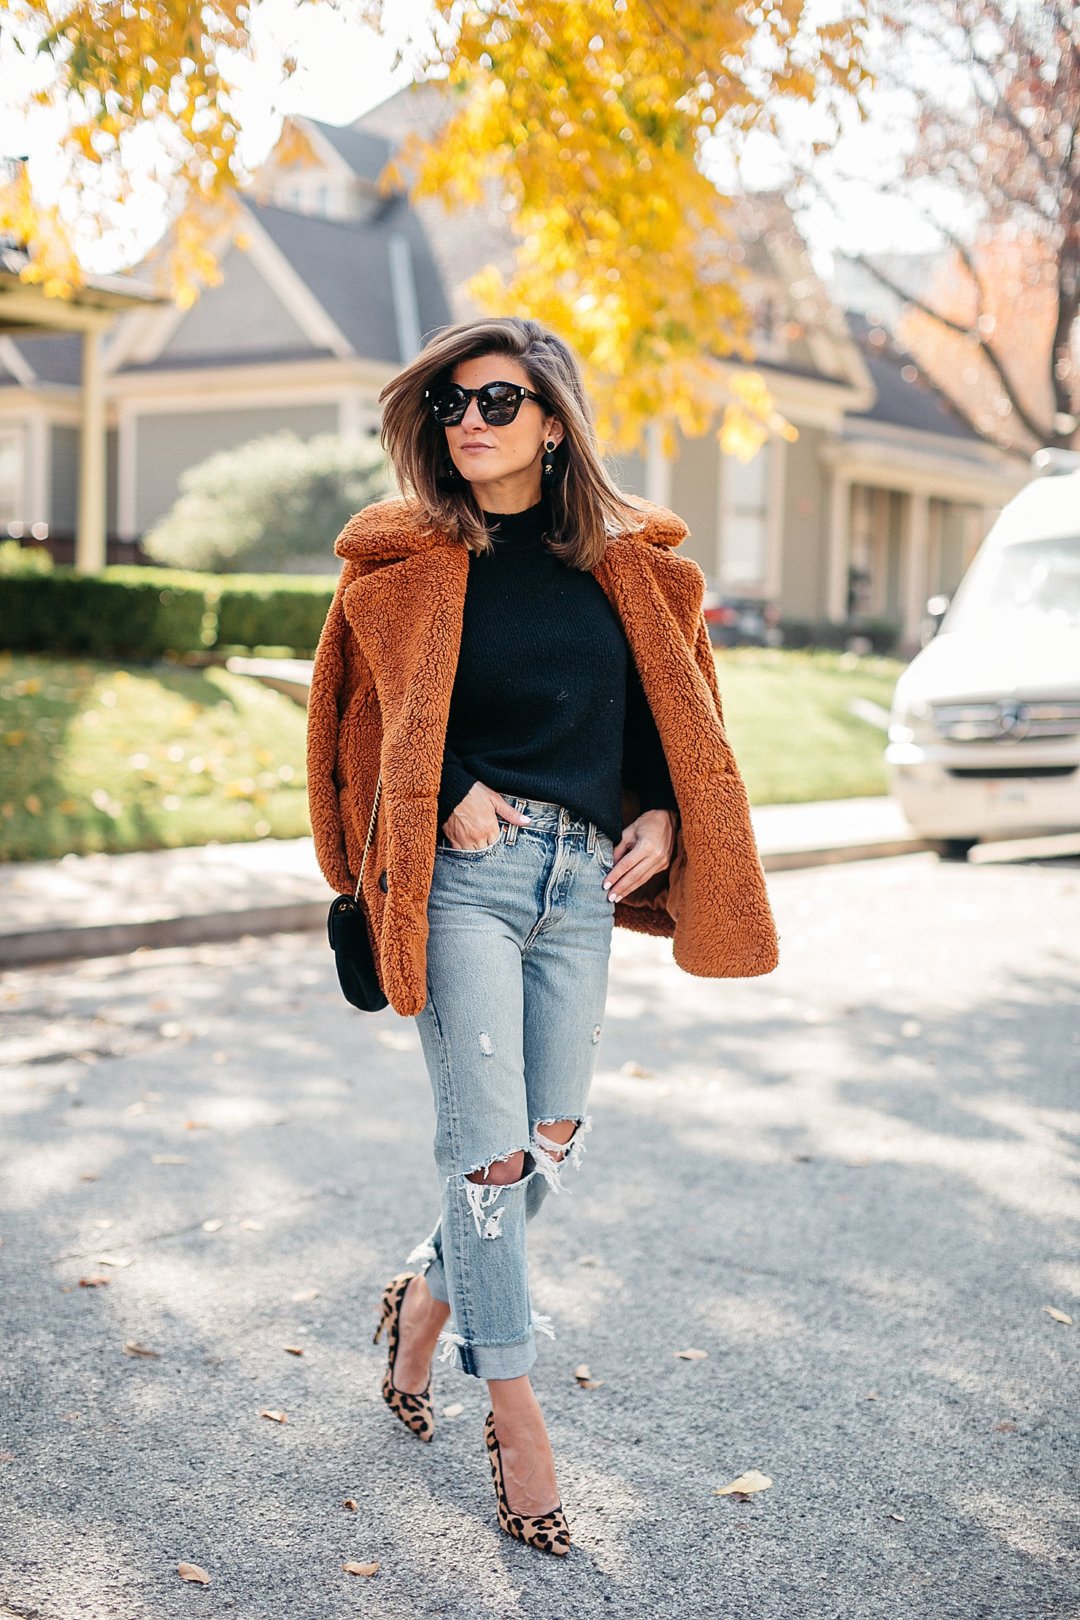 Best Saturday Outfit Winter Ideas